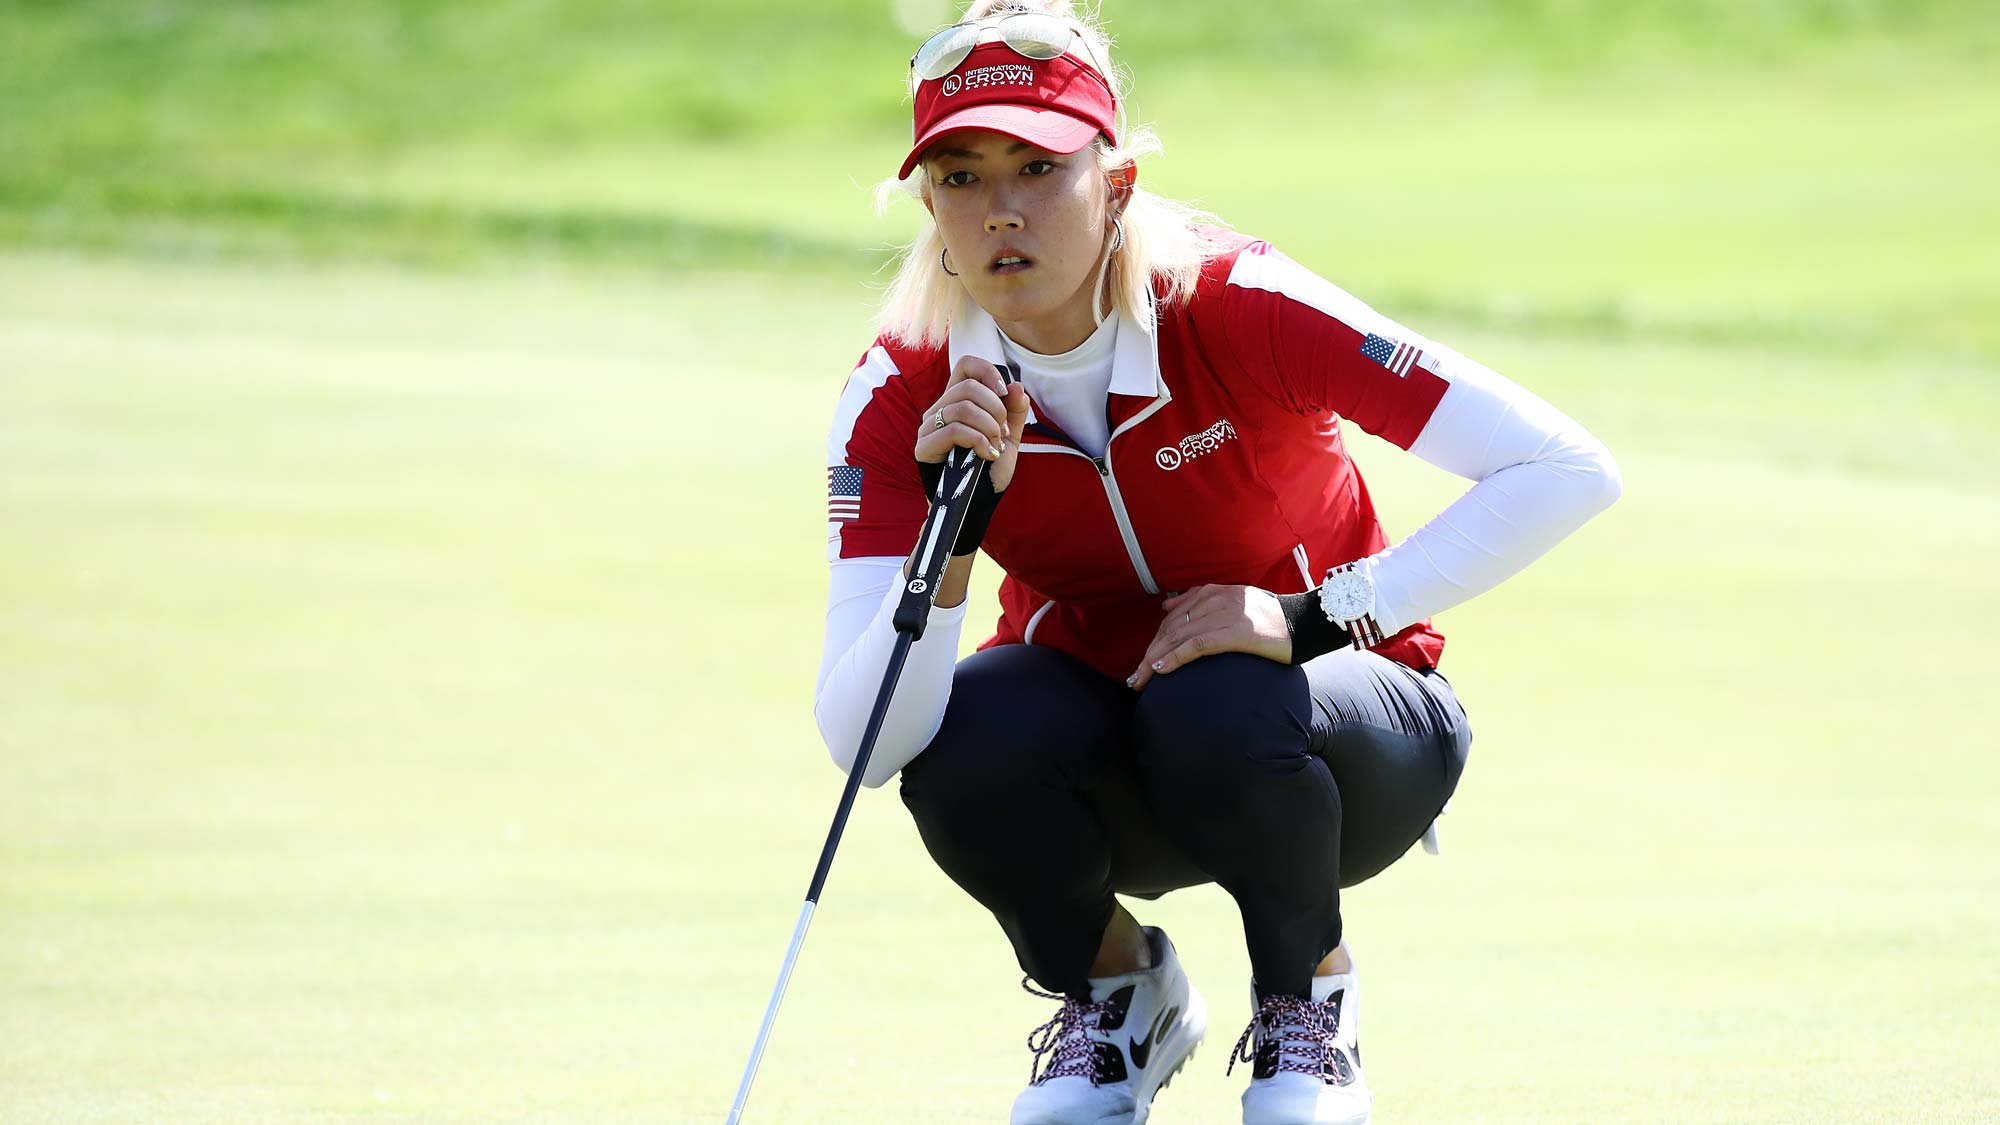 Michelle Wie of the United States lines up for a putt on the 3rd green during the Singles match against Moriya Jutanugarn of Thailand on day four of the UL International Crown